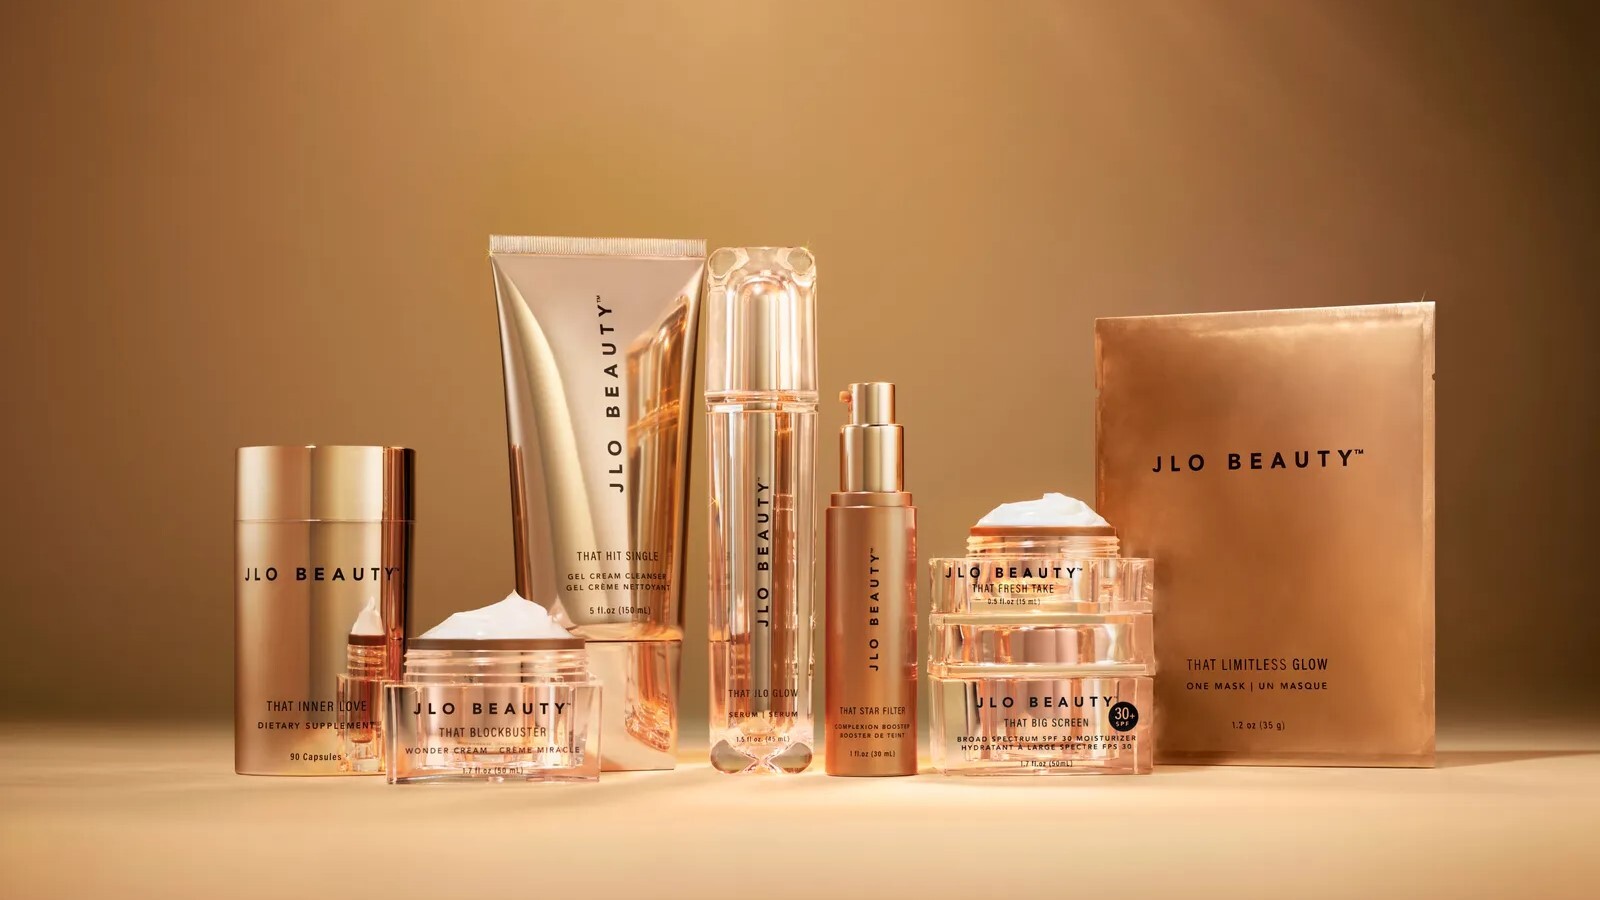 JLo Beauty Review: Does It Worth the Hype?